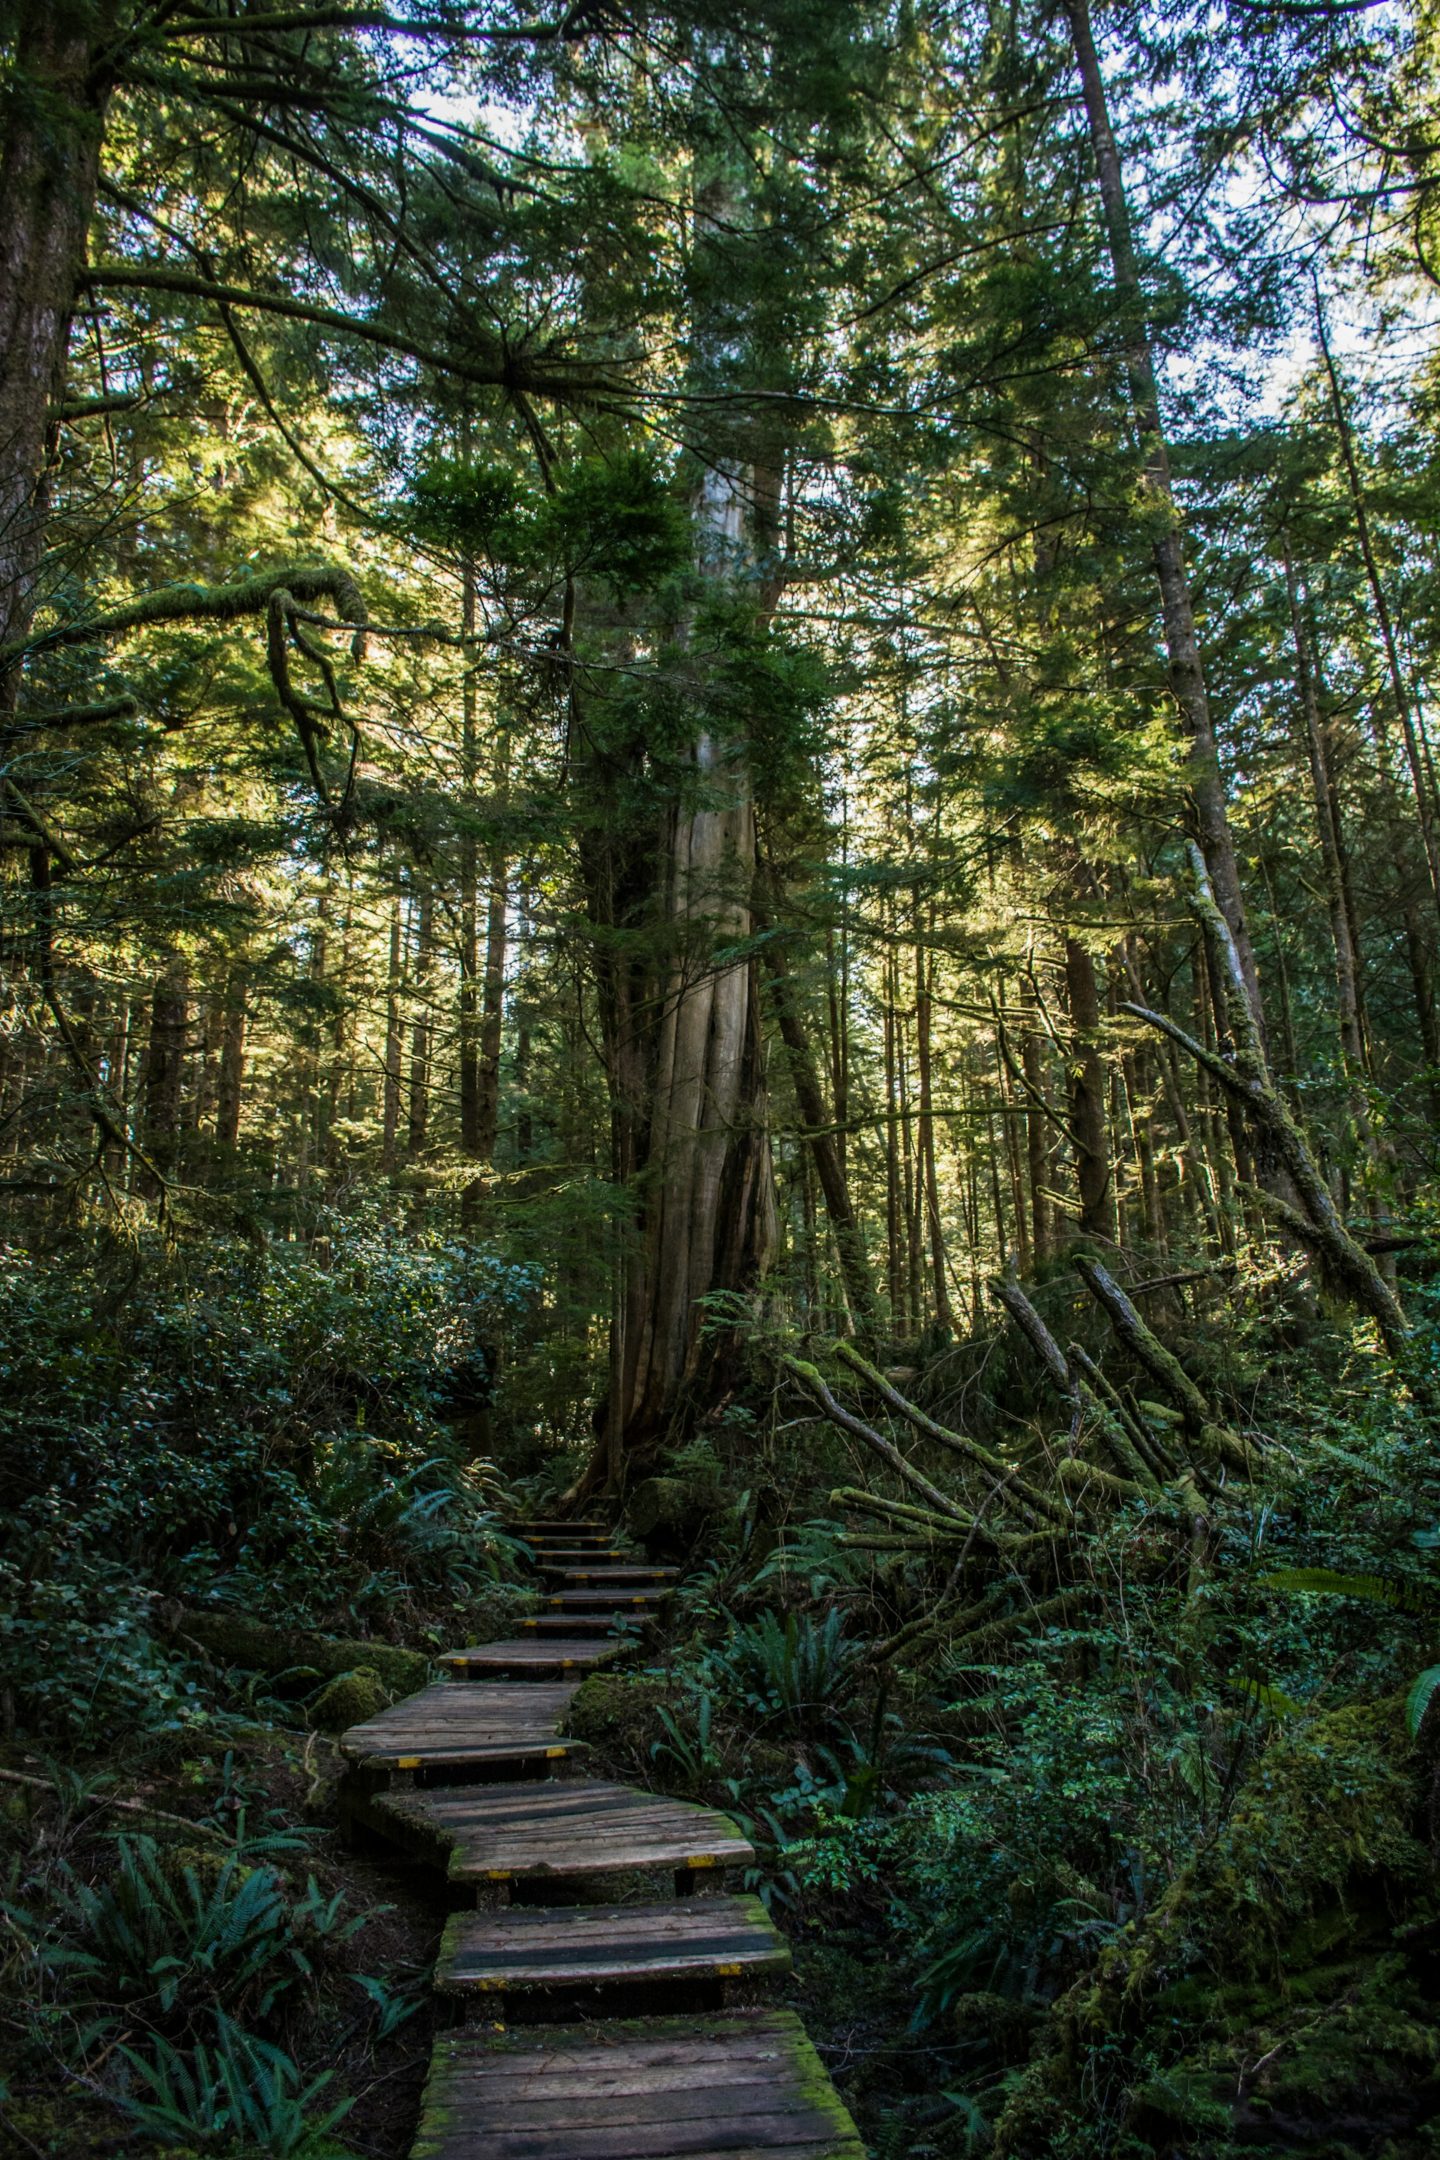 A Tofino hiking trail surrounded by trees